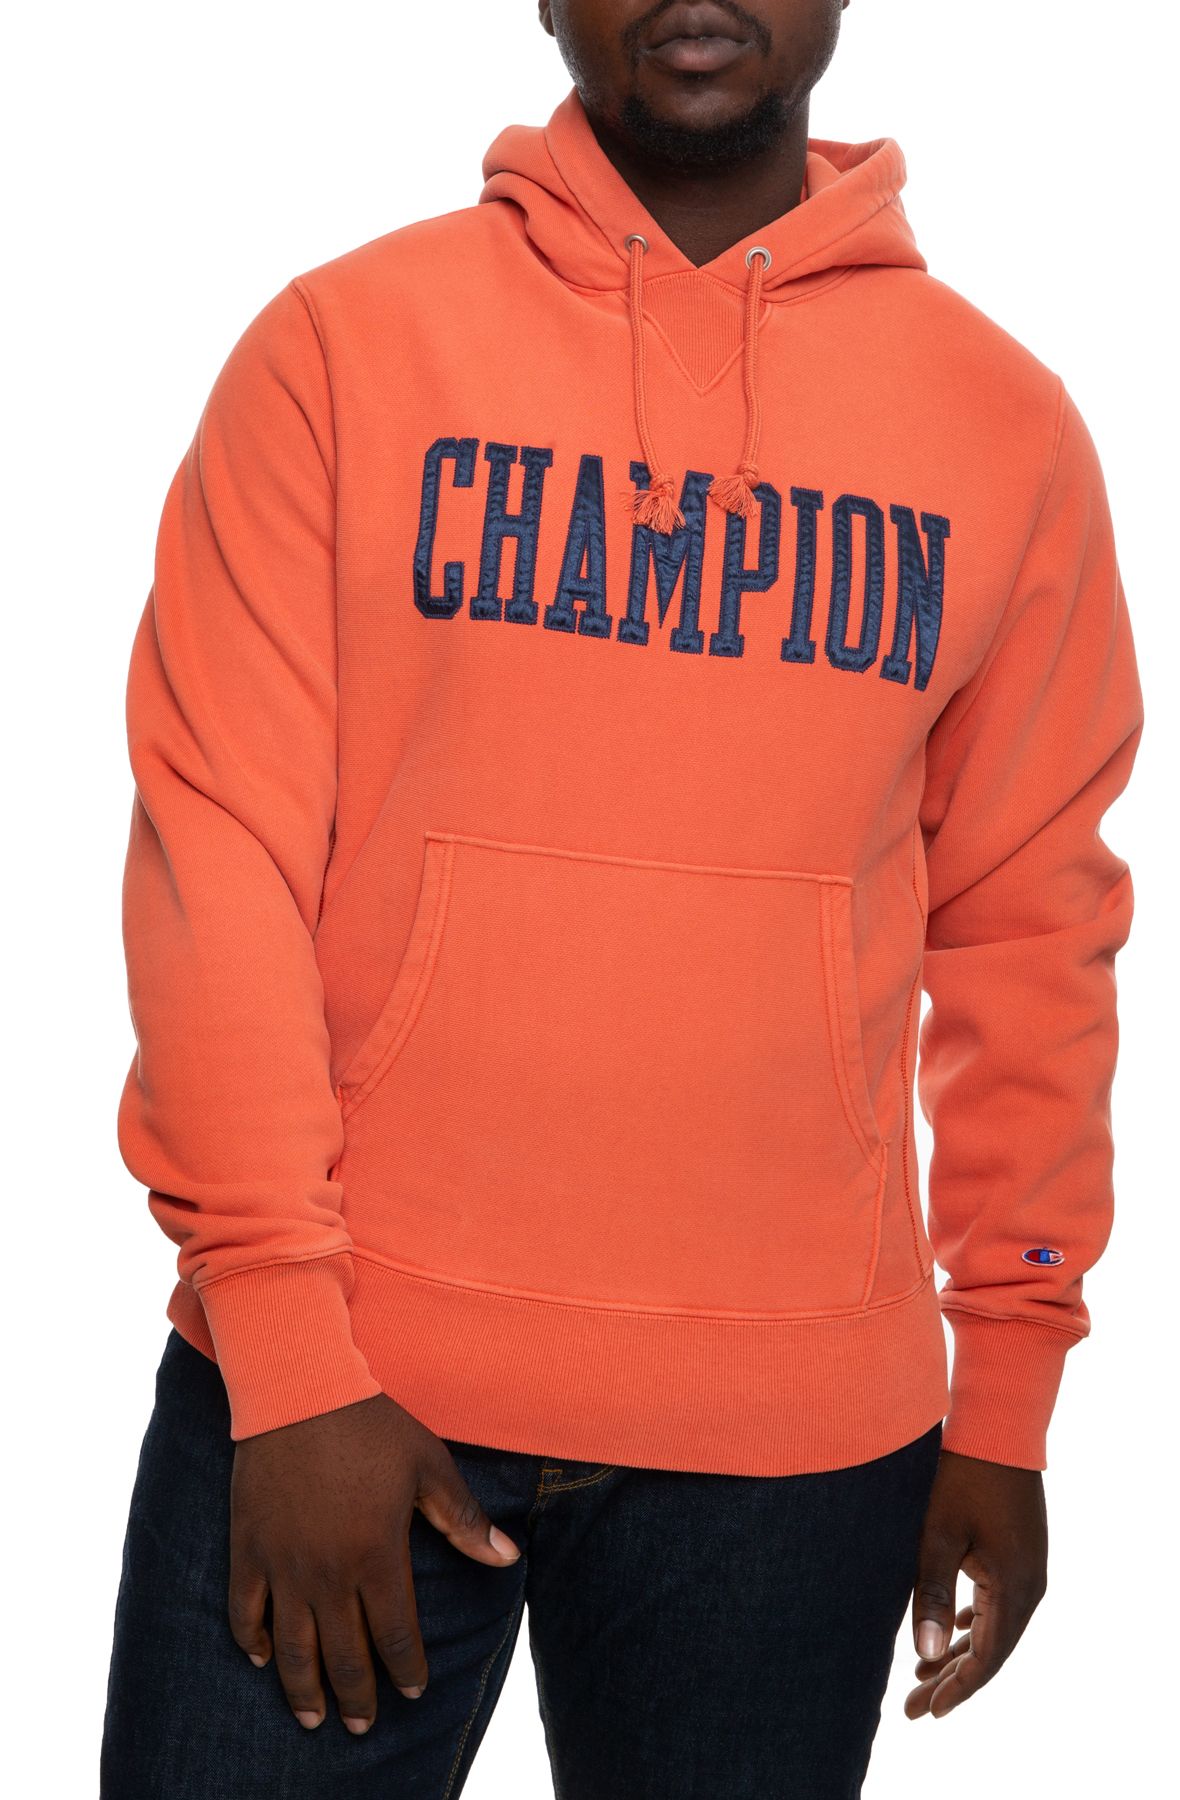 CHAMPION Vintage Wash Reverse Weave Pullover Hoodie S4454550272-ORG - Shiekh